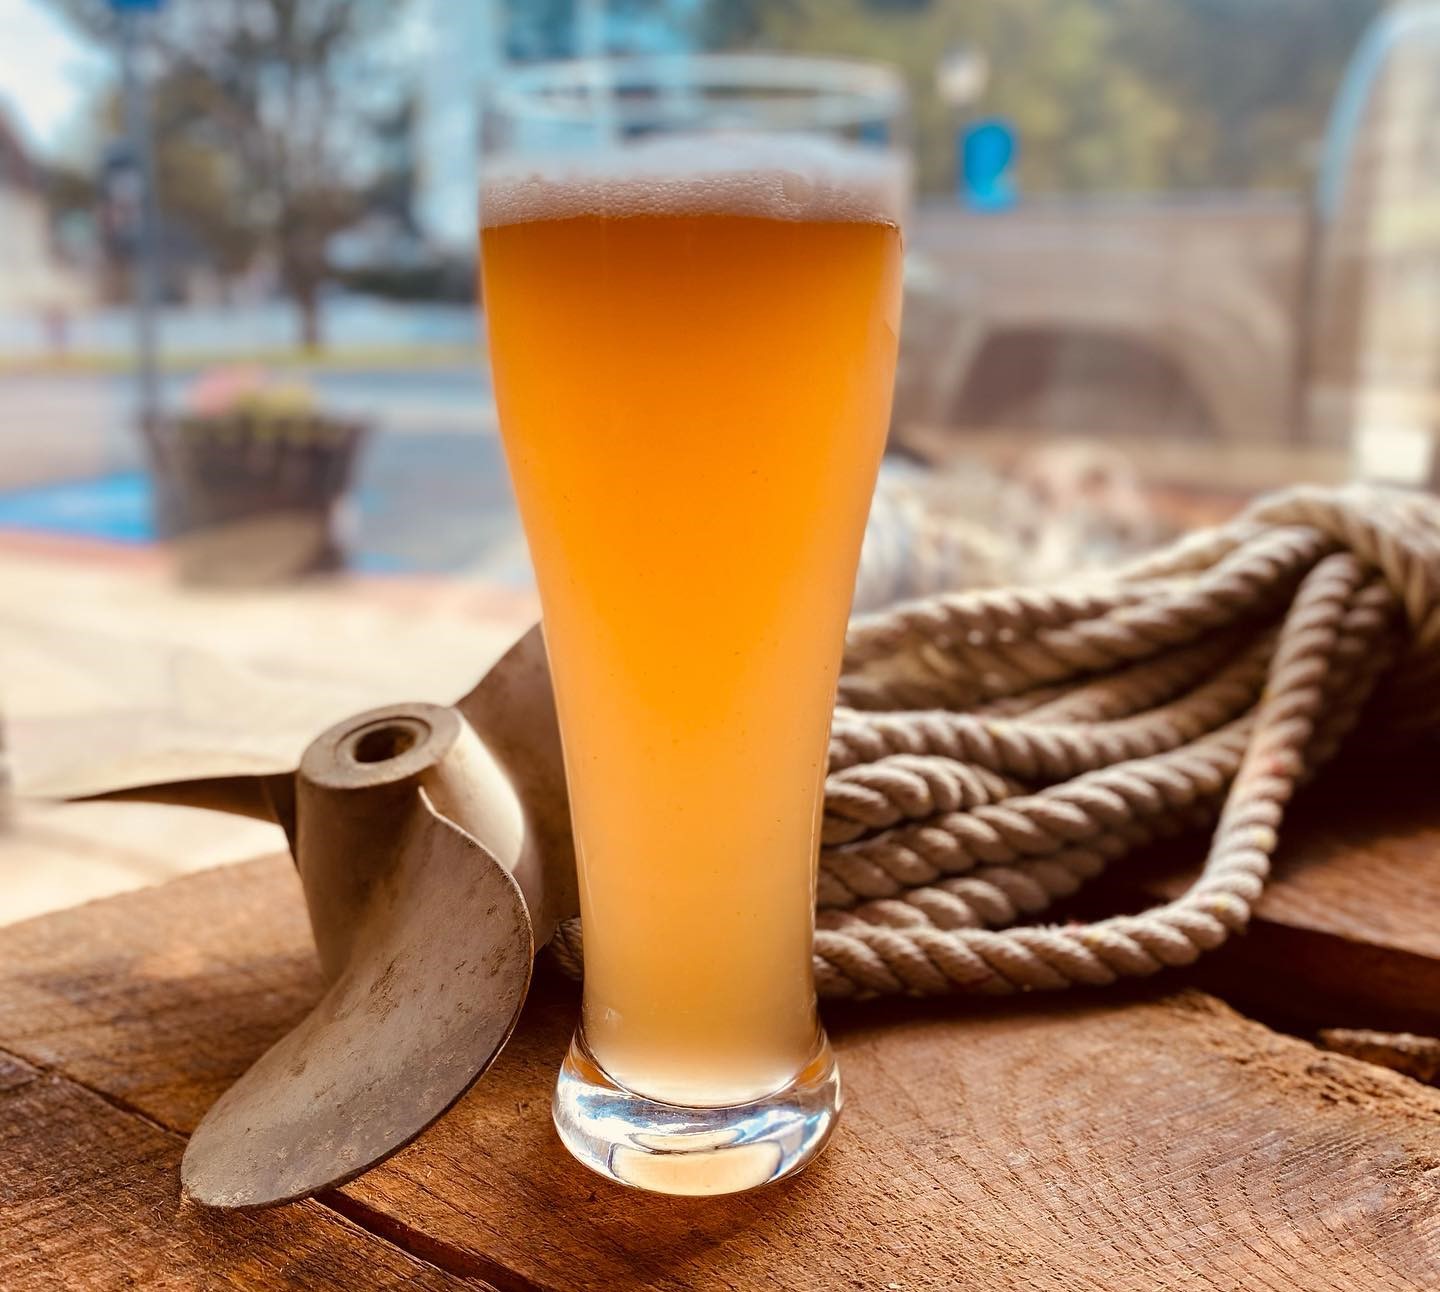 A glass of beer on a wooden table with a boat propeller and rope